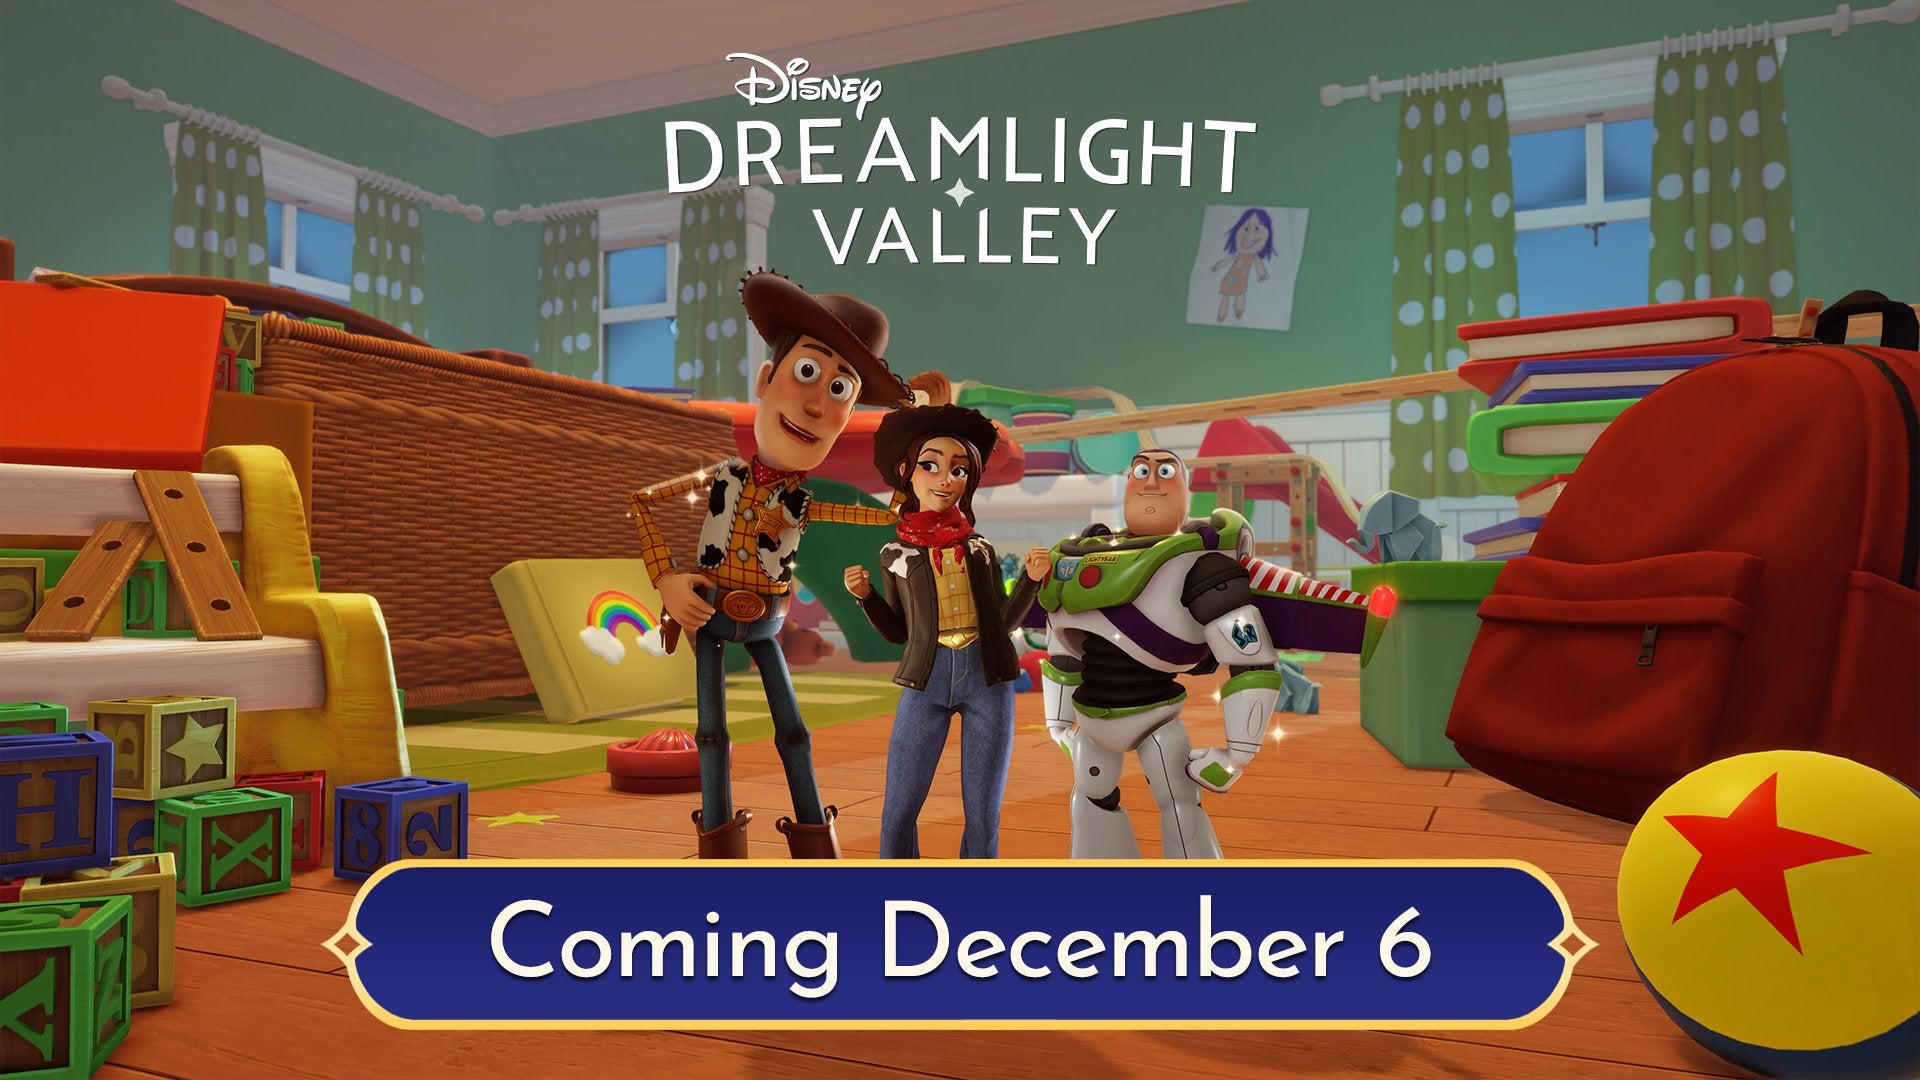 Image for Disney Dreamlight Valley will introduce Toy Story’s Woody and Buzz Lightyear in December